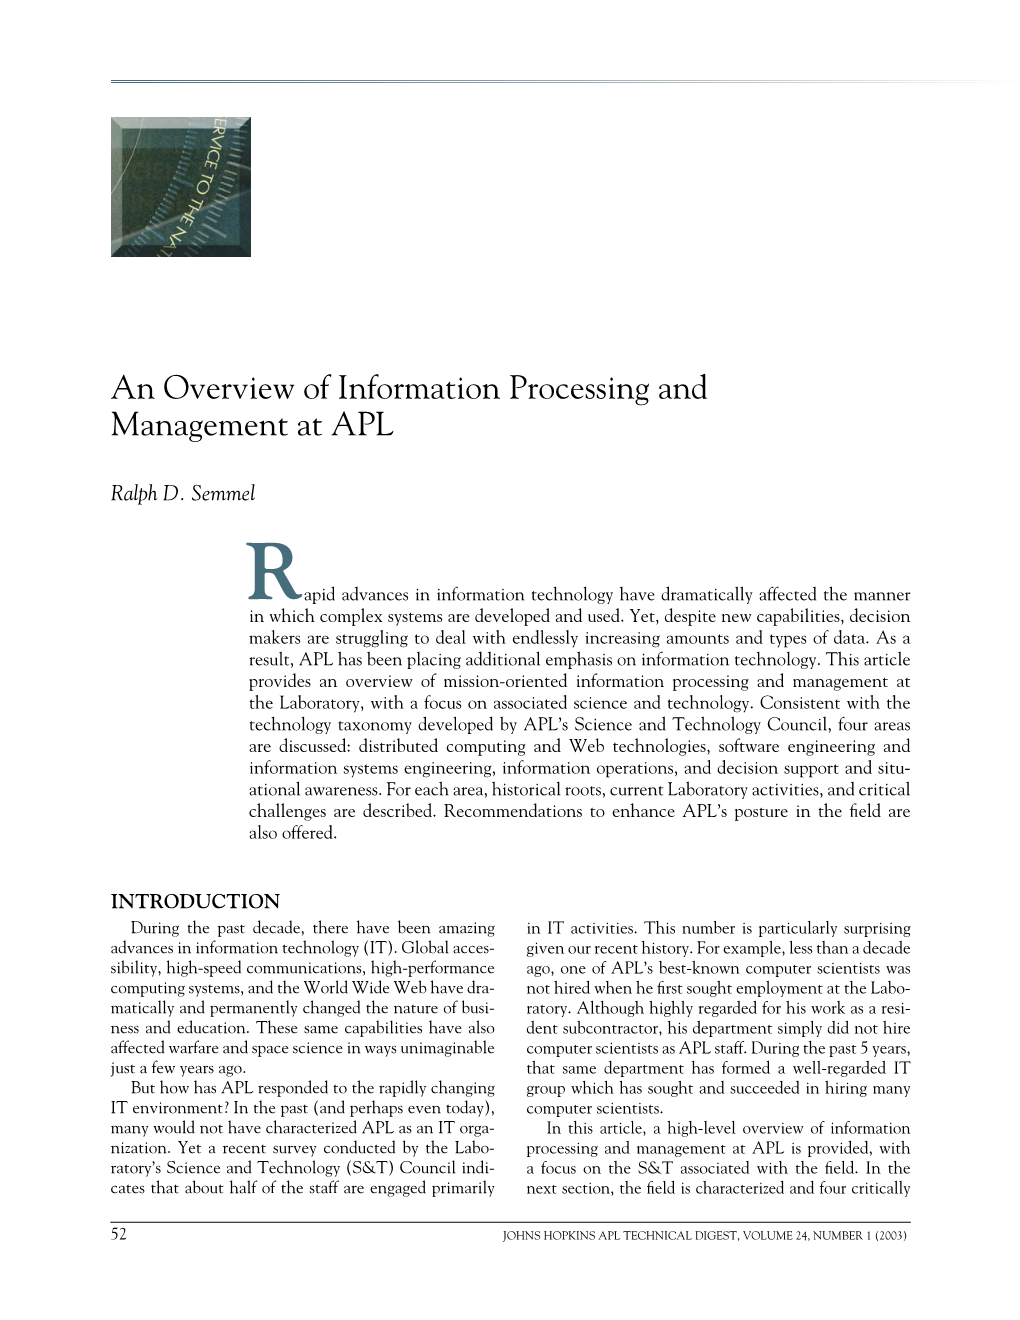 An Overview of Information Processing and Management at APL